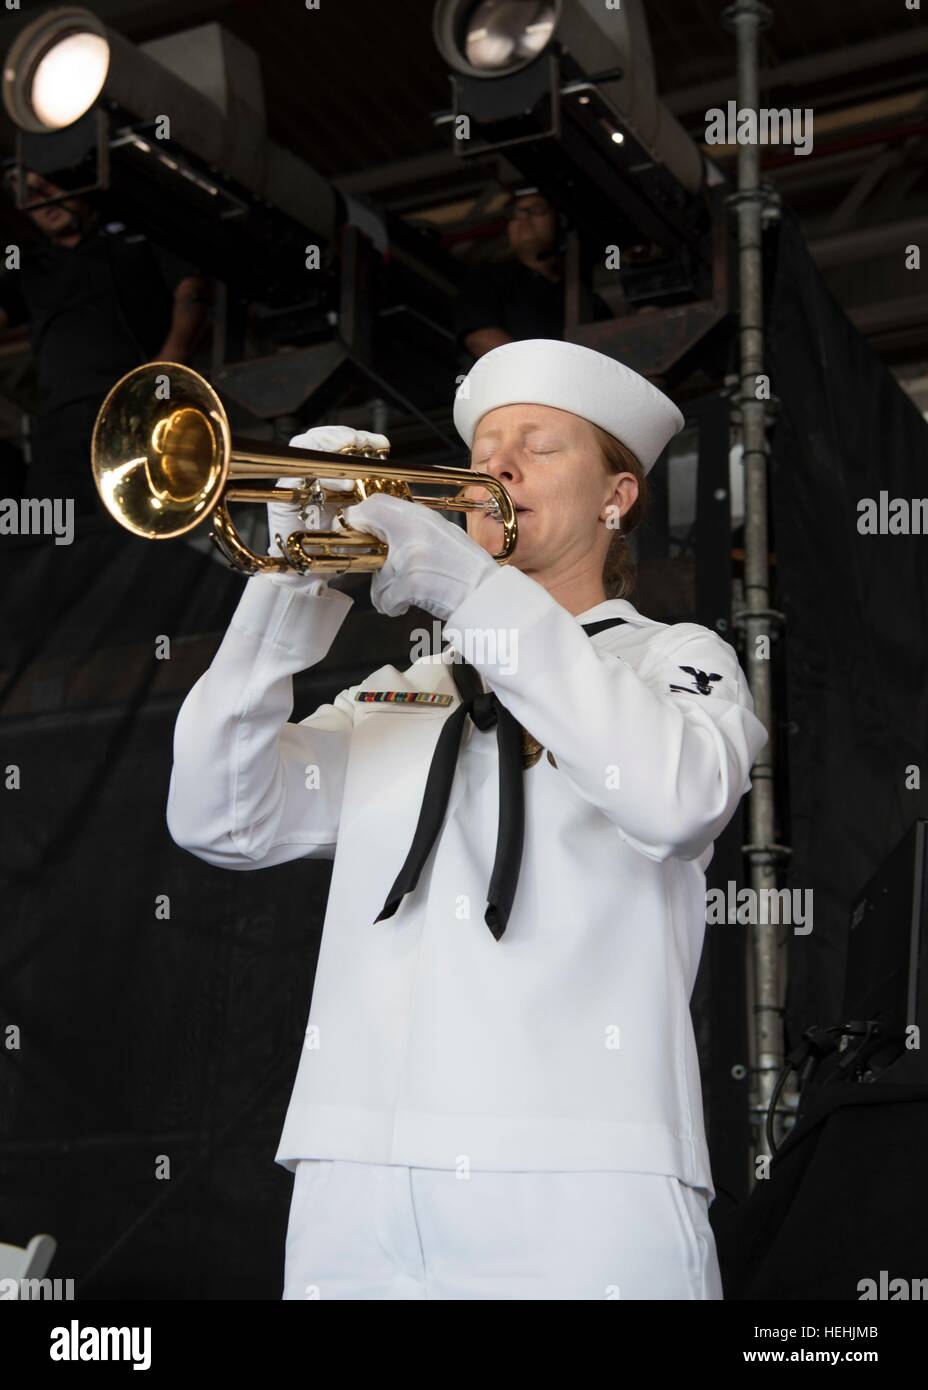 A U.S. Pacific Fleet Band member performs Taps on a bugle during the 75th Commemoration Event of the attacks on Pearl Harbor at the Joint Base Pearl Harbor-Hickam December 7, 2016 in Pearl Harbor, Hawaii. Stock Photo